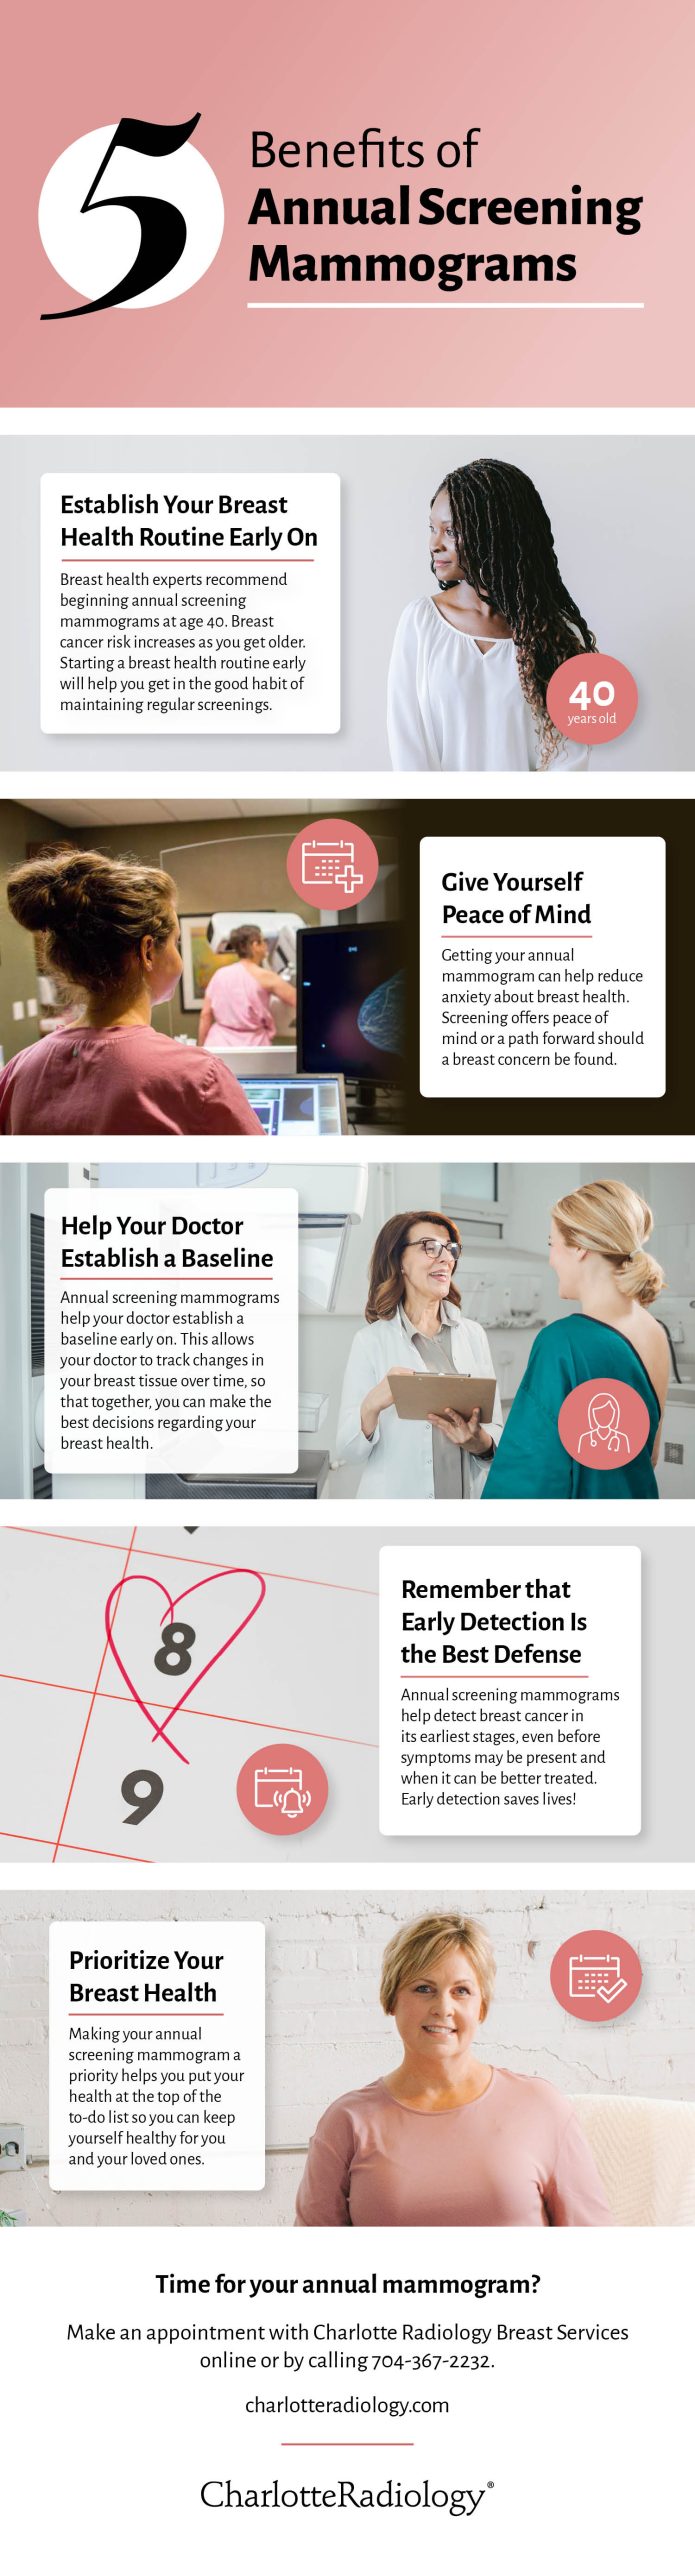 Benefits of annual mammograms infographic